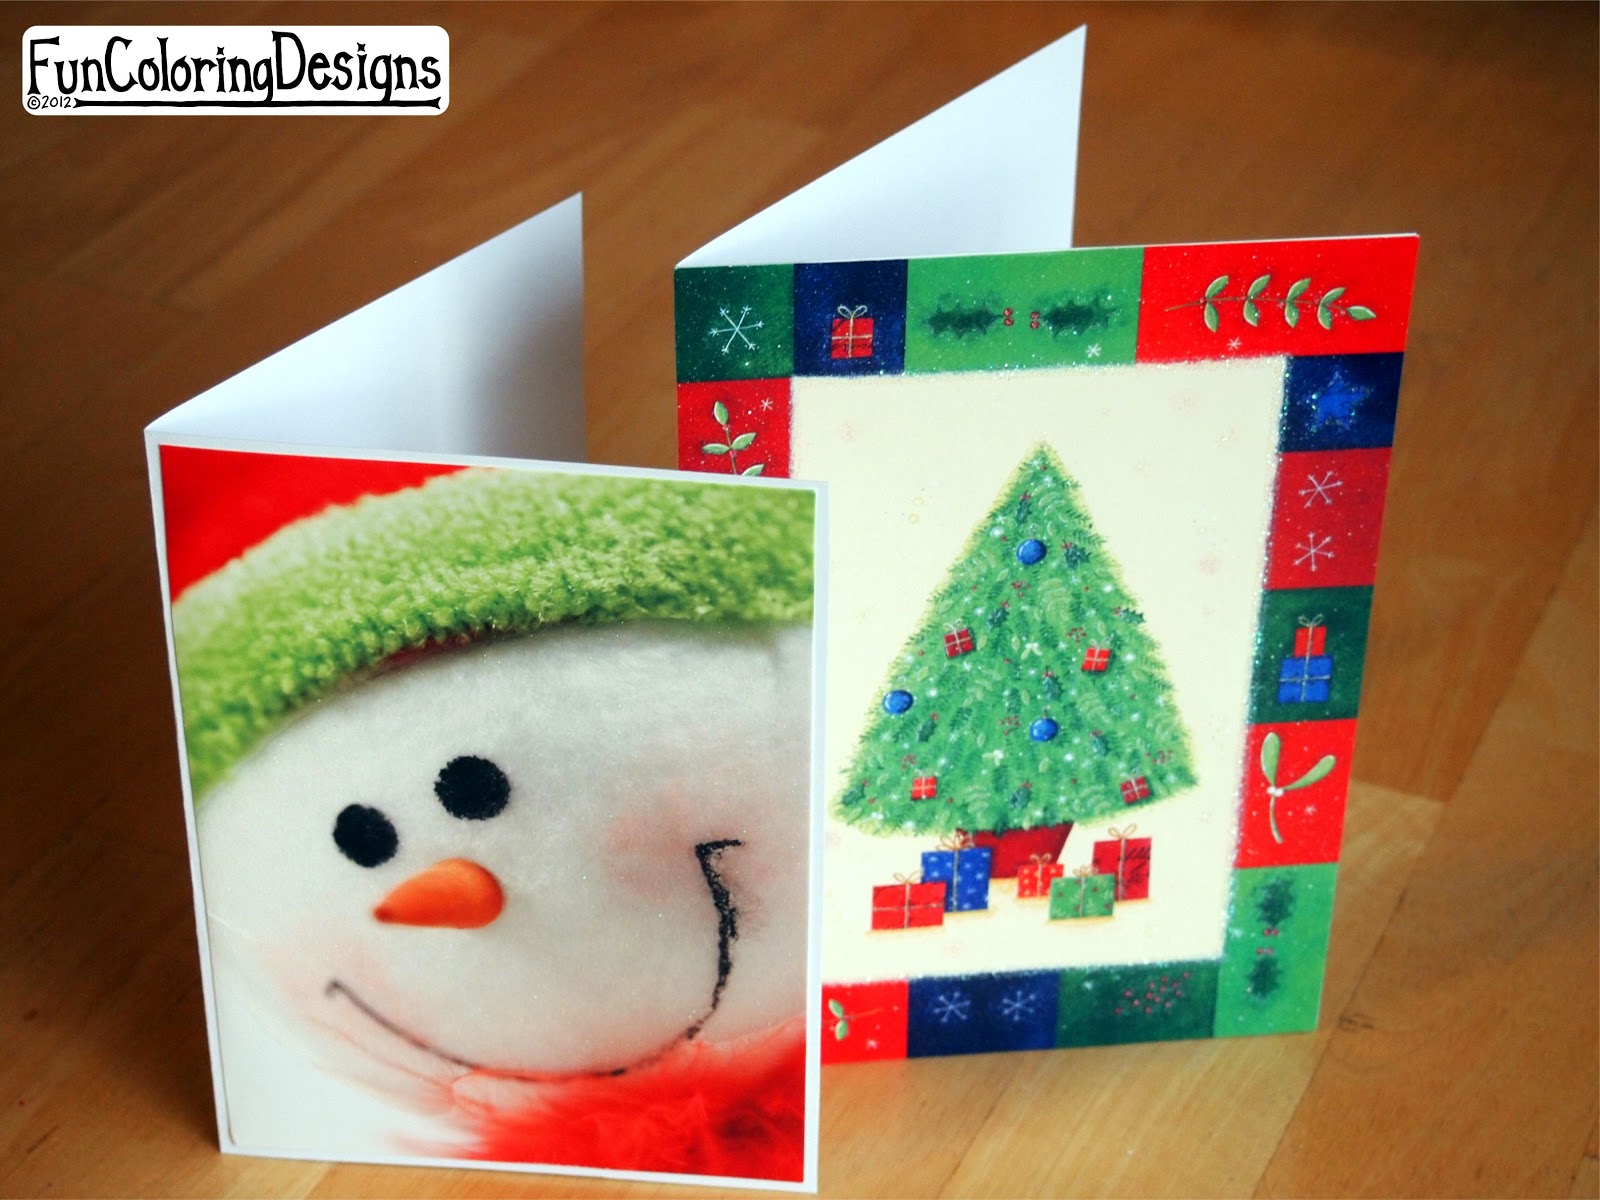 Fun Coloring Designs: DIY Upcycle Old Christmas Cards - Holidy Ideas